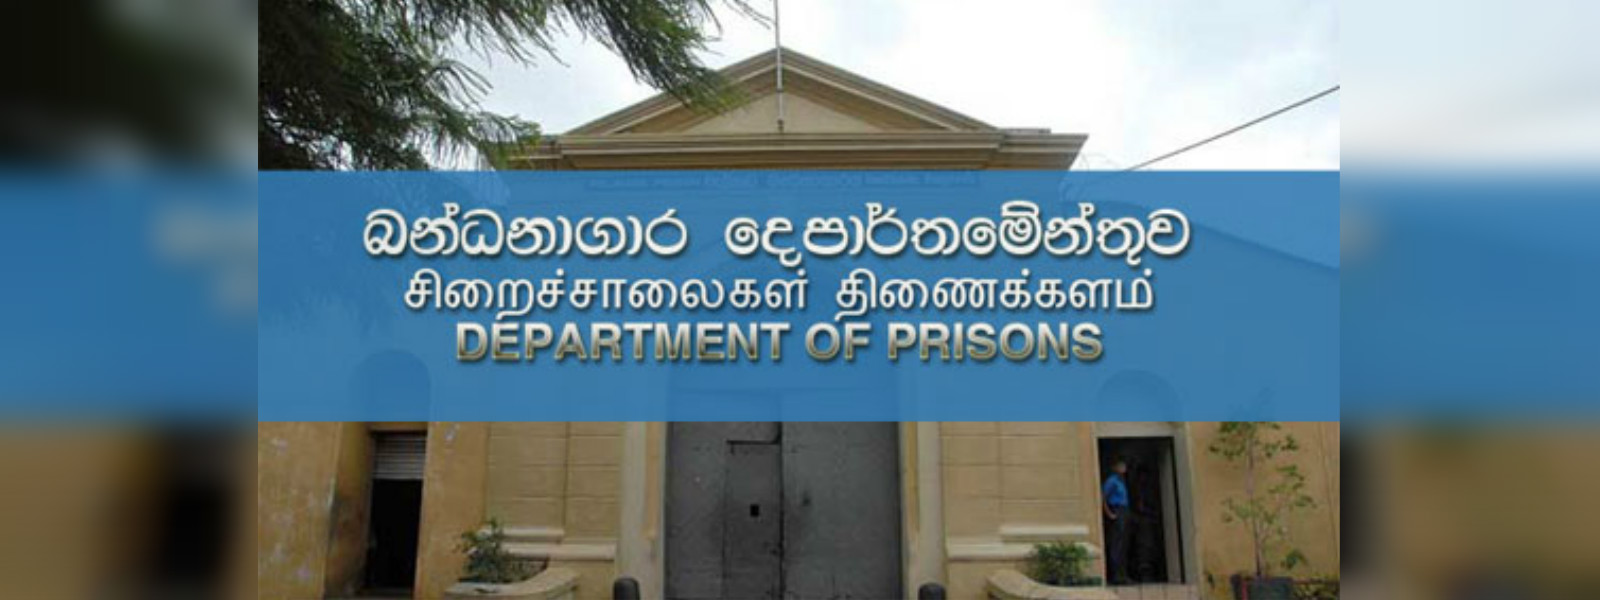 267 prisoners to be released under Presidential pardon